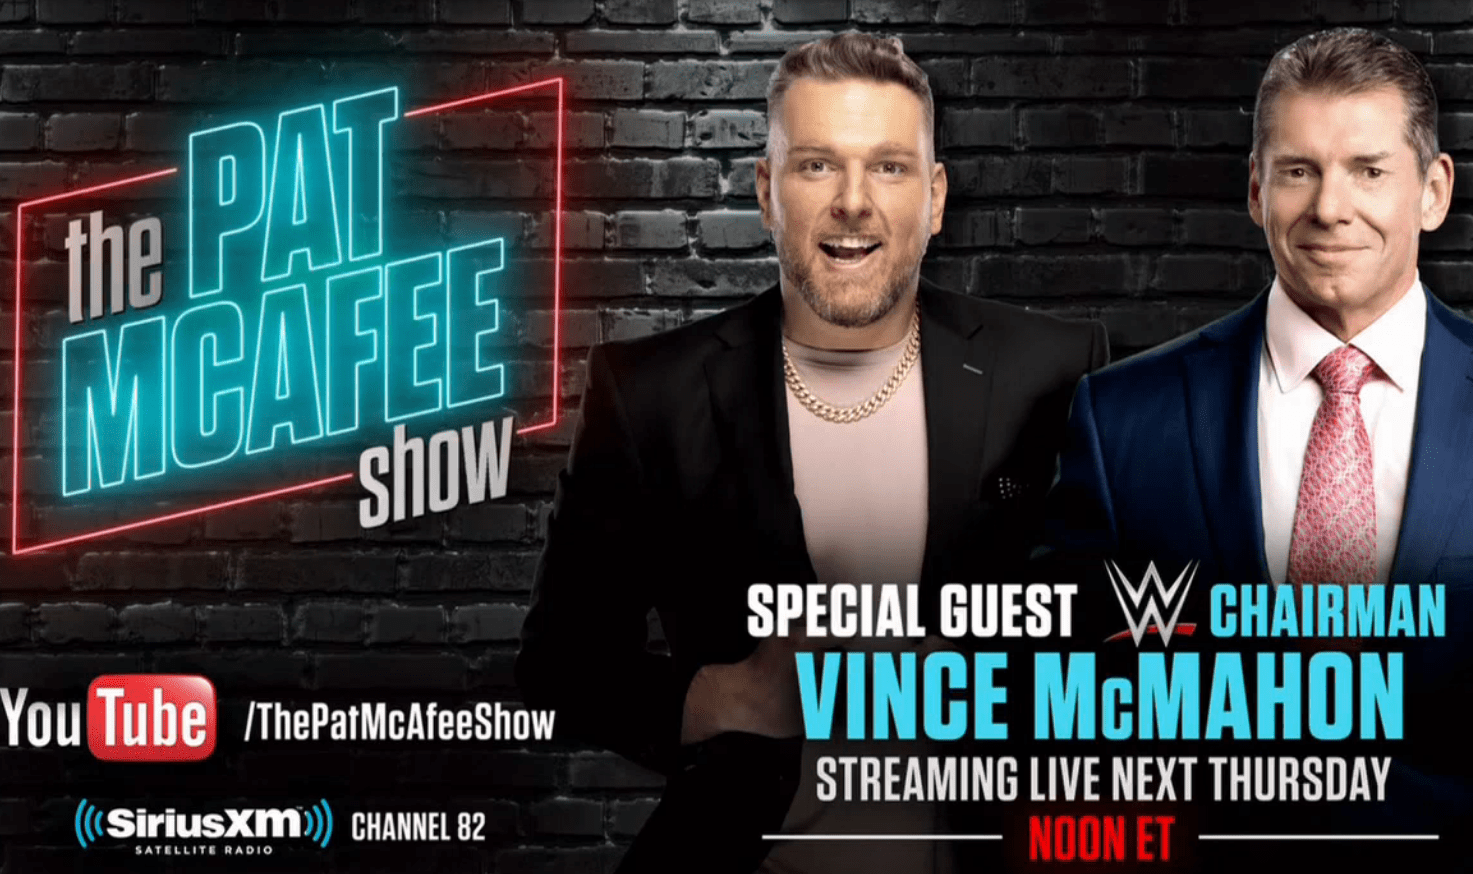 WWE’s Current Plan For Vince McMahon Vs. Pat McAfee ‘Match’